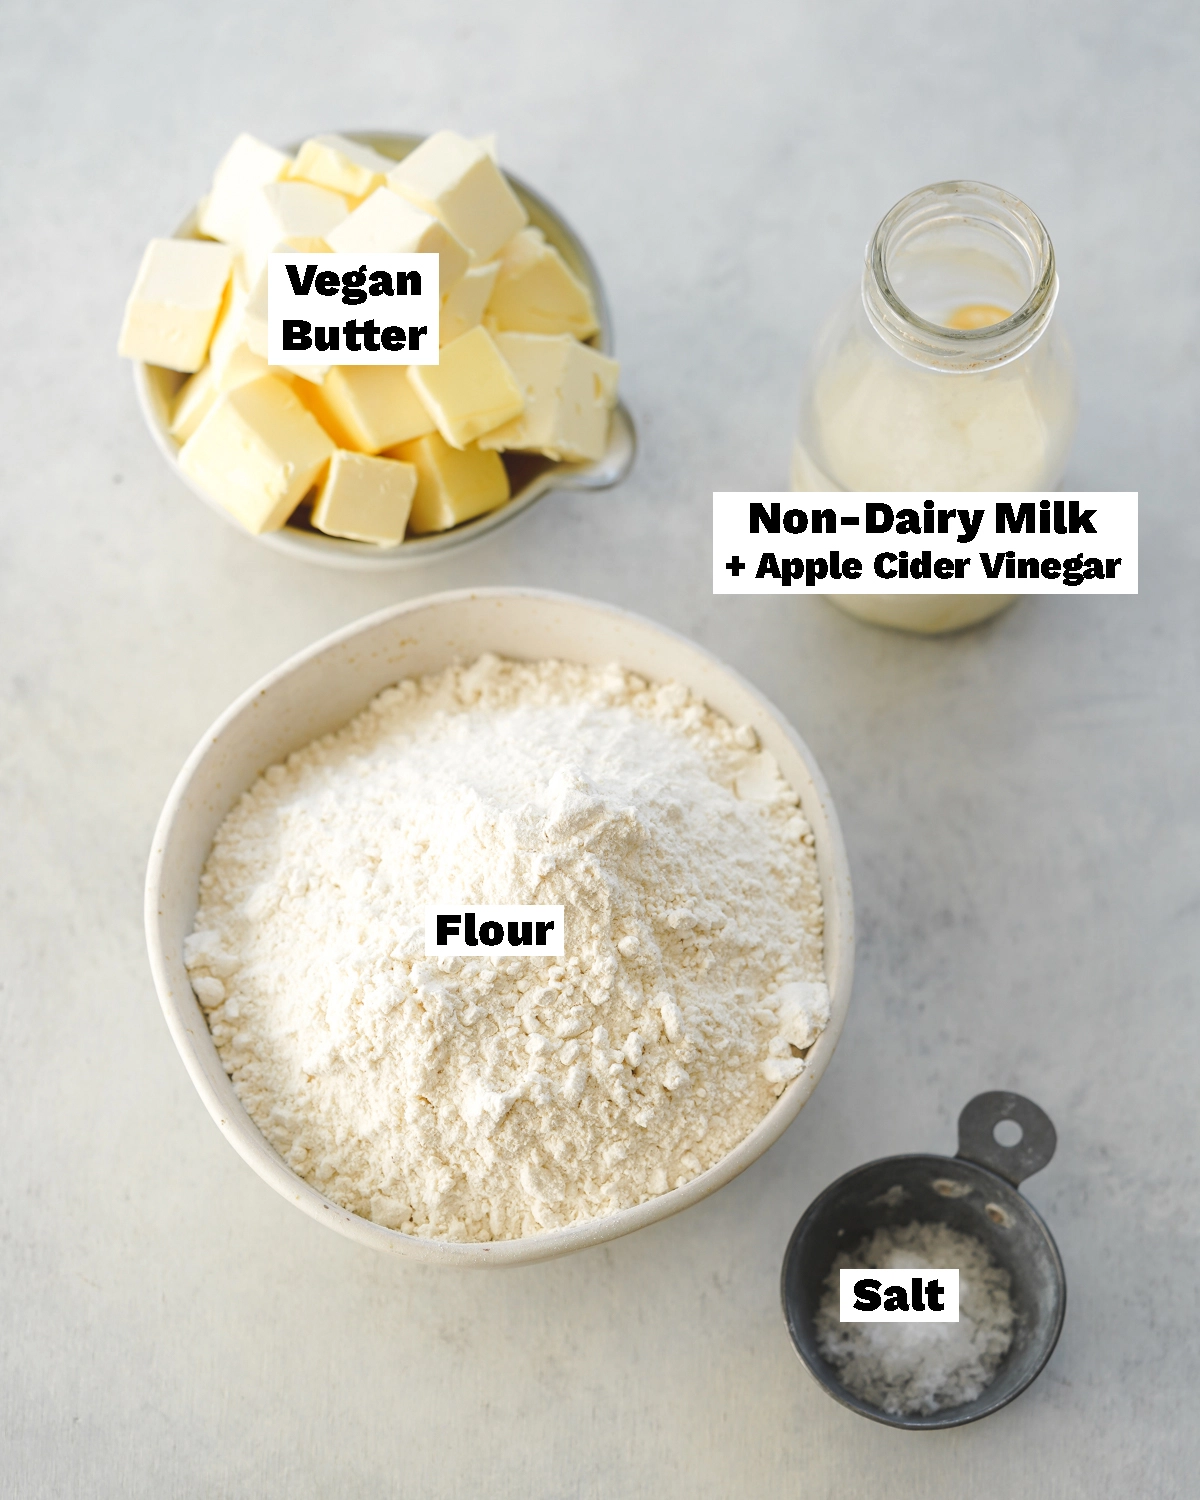 ingredients to make vegan pie crust measured out in bowls on a grey surface.